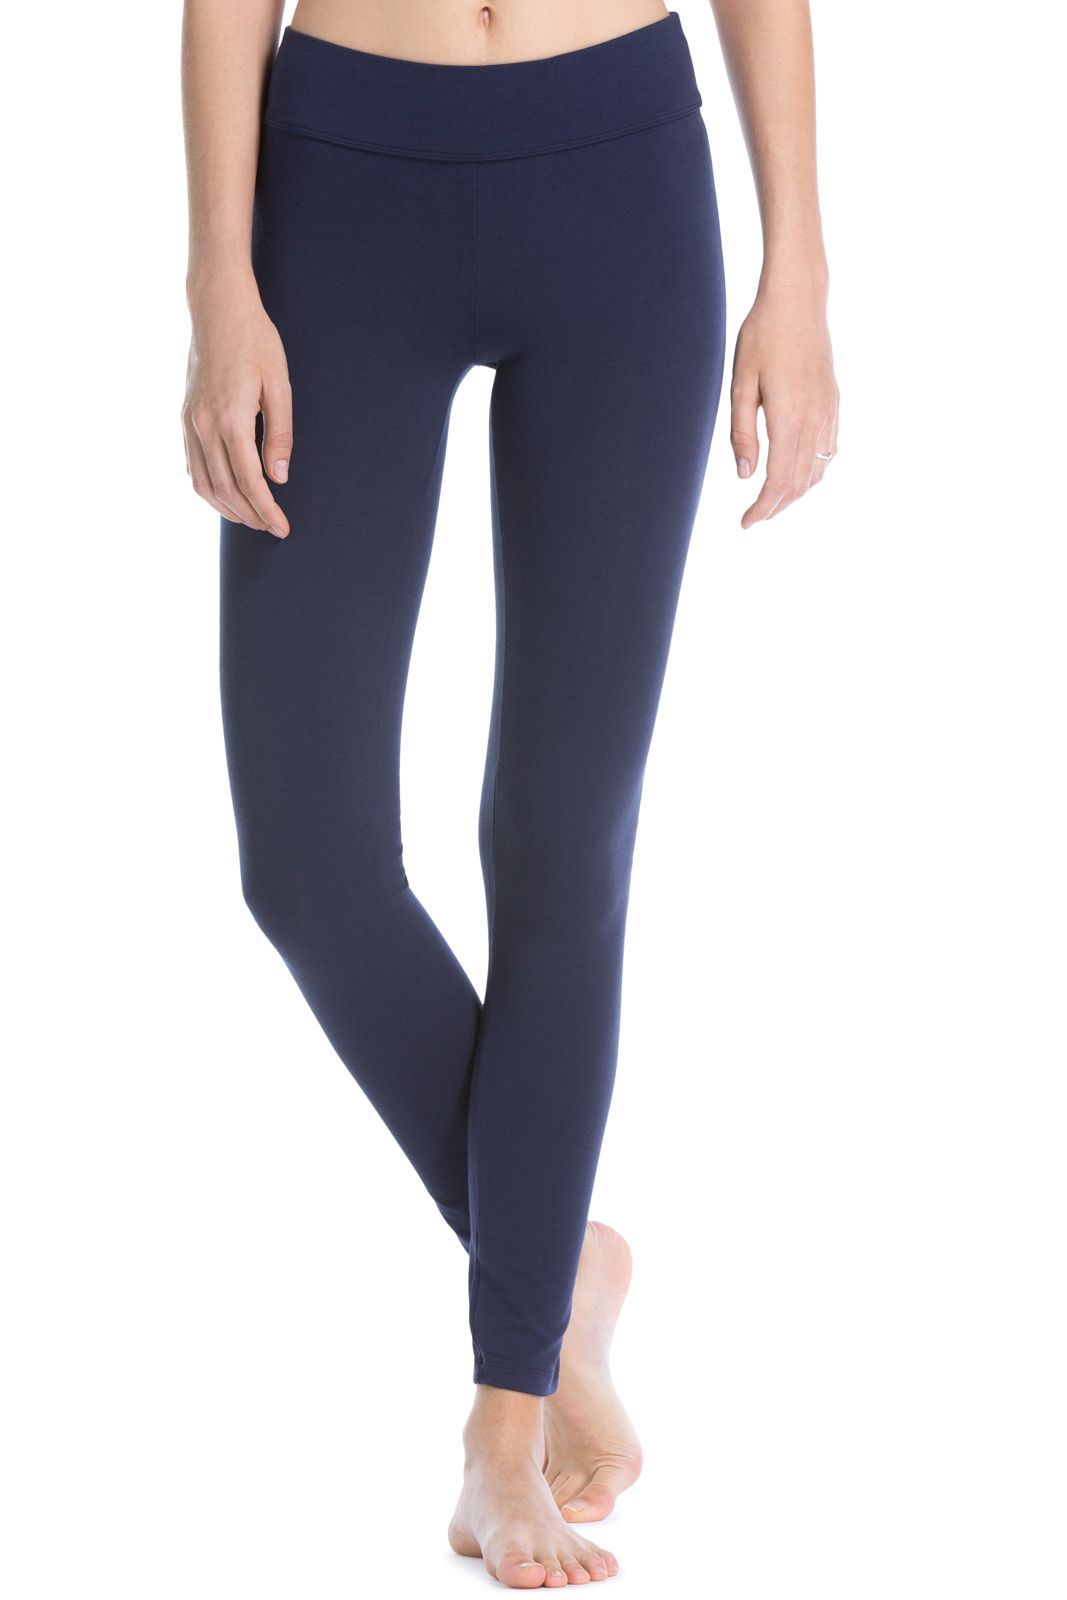 Tall Women’s 36”/37” Mid Waisted Extra Long Leggings with Phone Pocket  Ankle Length Workout Active Pants